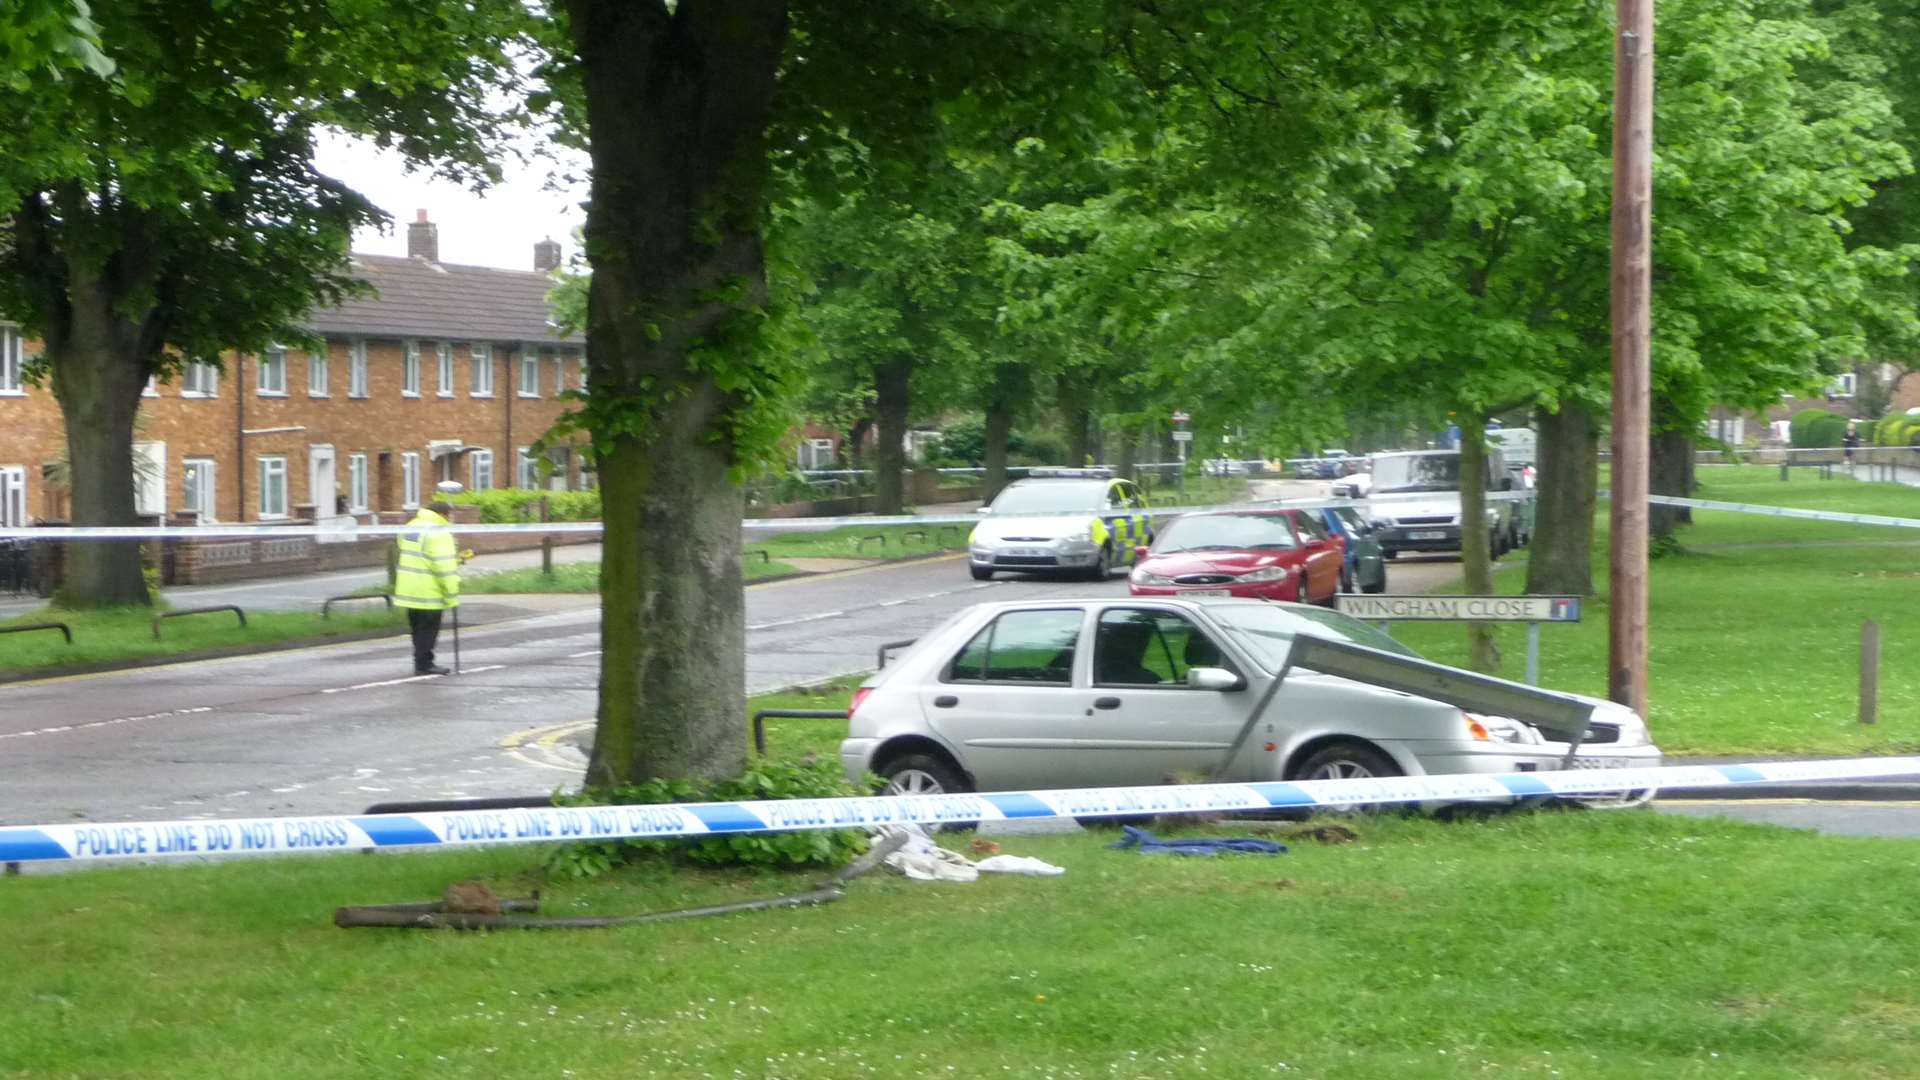 A man died after his Ford Fiesta crashed in Twydall. Picture: Martin Philbrick